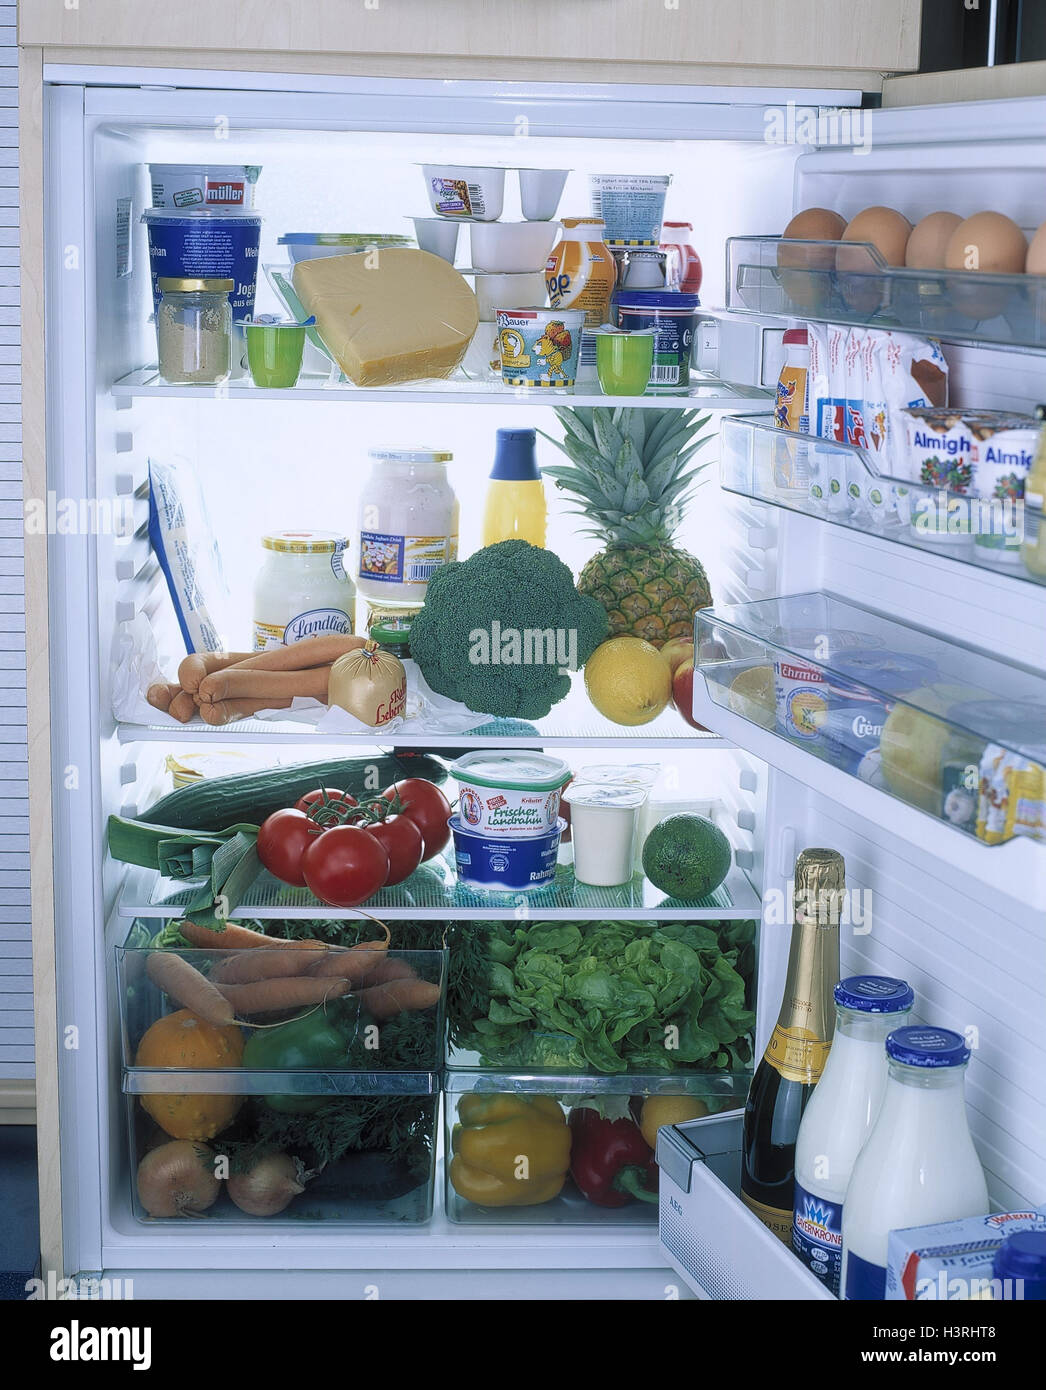 Fridge, openly, completely, food, household appliance, electrically, storage, foods, food, food, retention, stock, stocks, keeps, milk, milk products, vegetables, tropical fruits, food, abundance, consumption, material recording, Still life Stock Photo